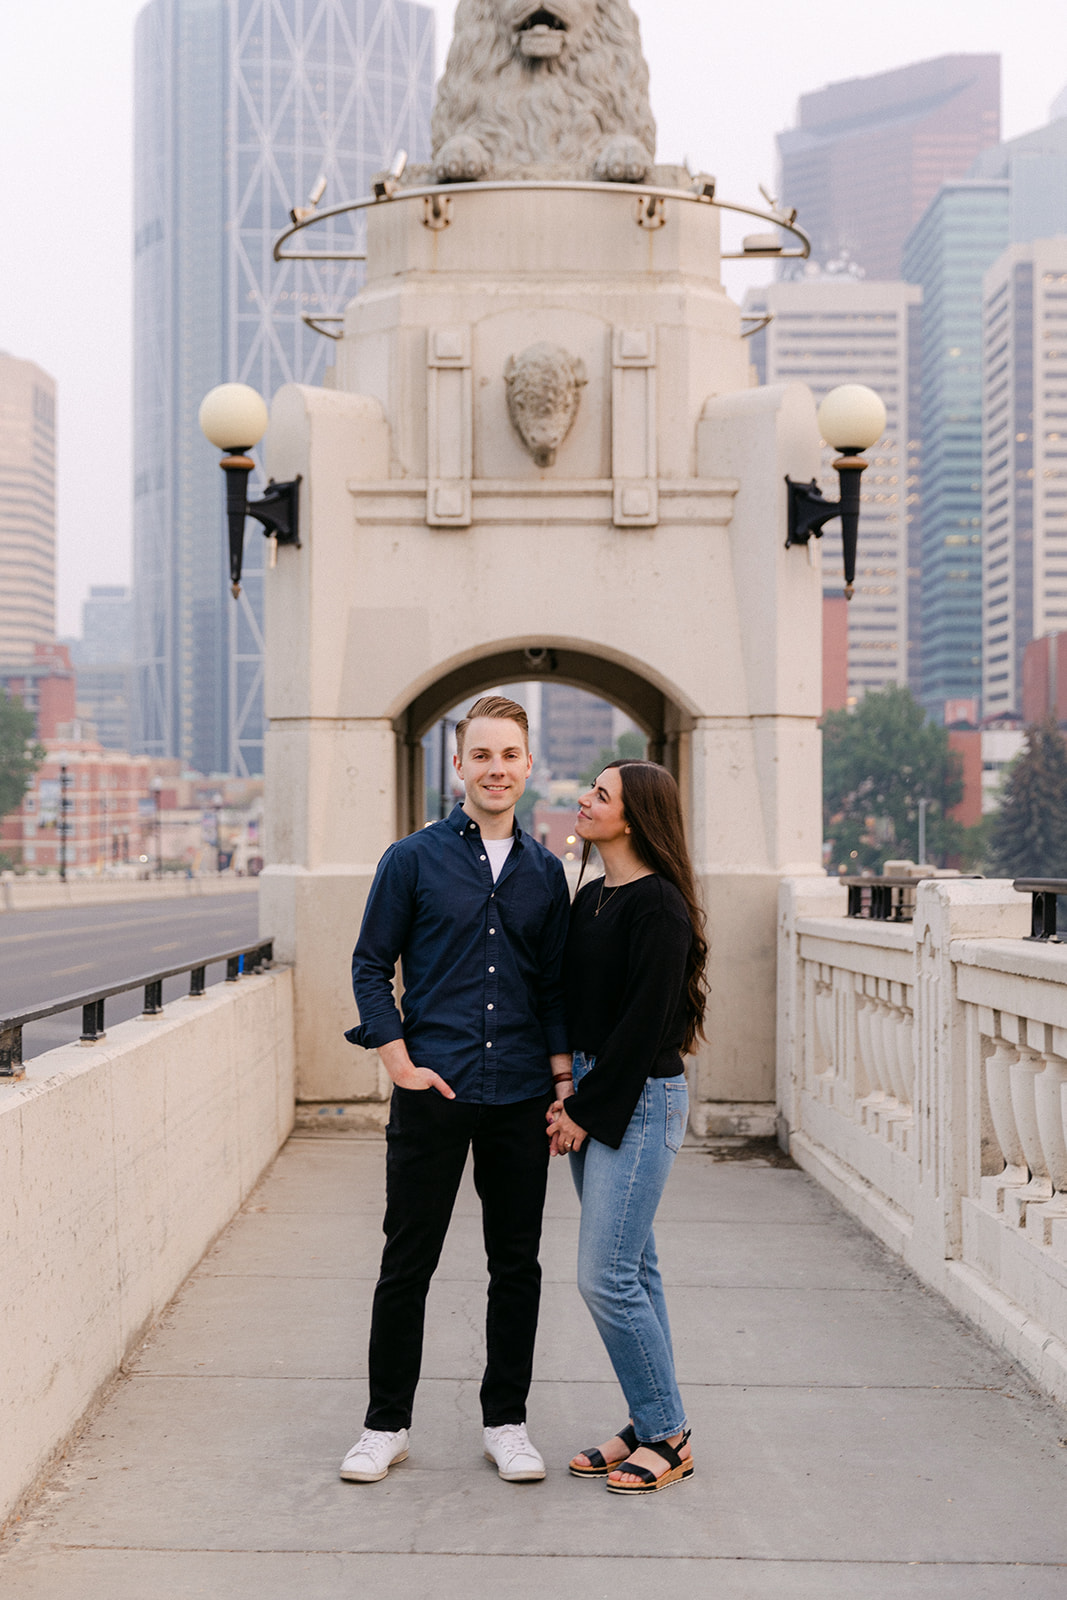 Downtown Calgary Classic and Casual engagement photography, photographs at Centre Street Bridge and Prince's Island Park